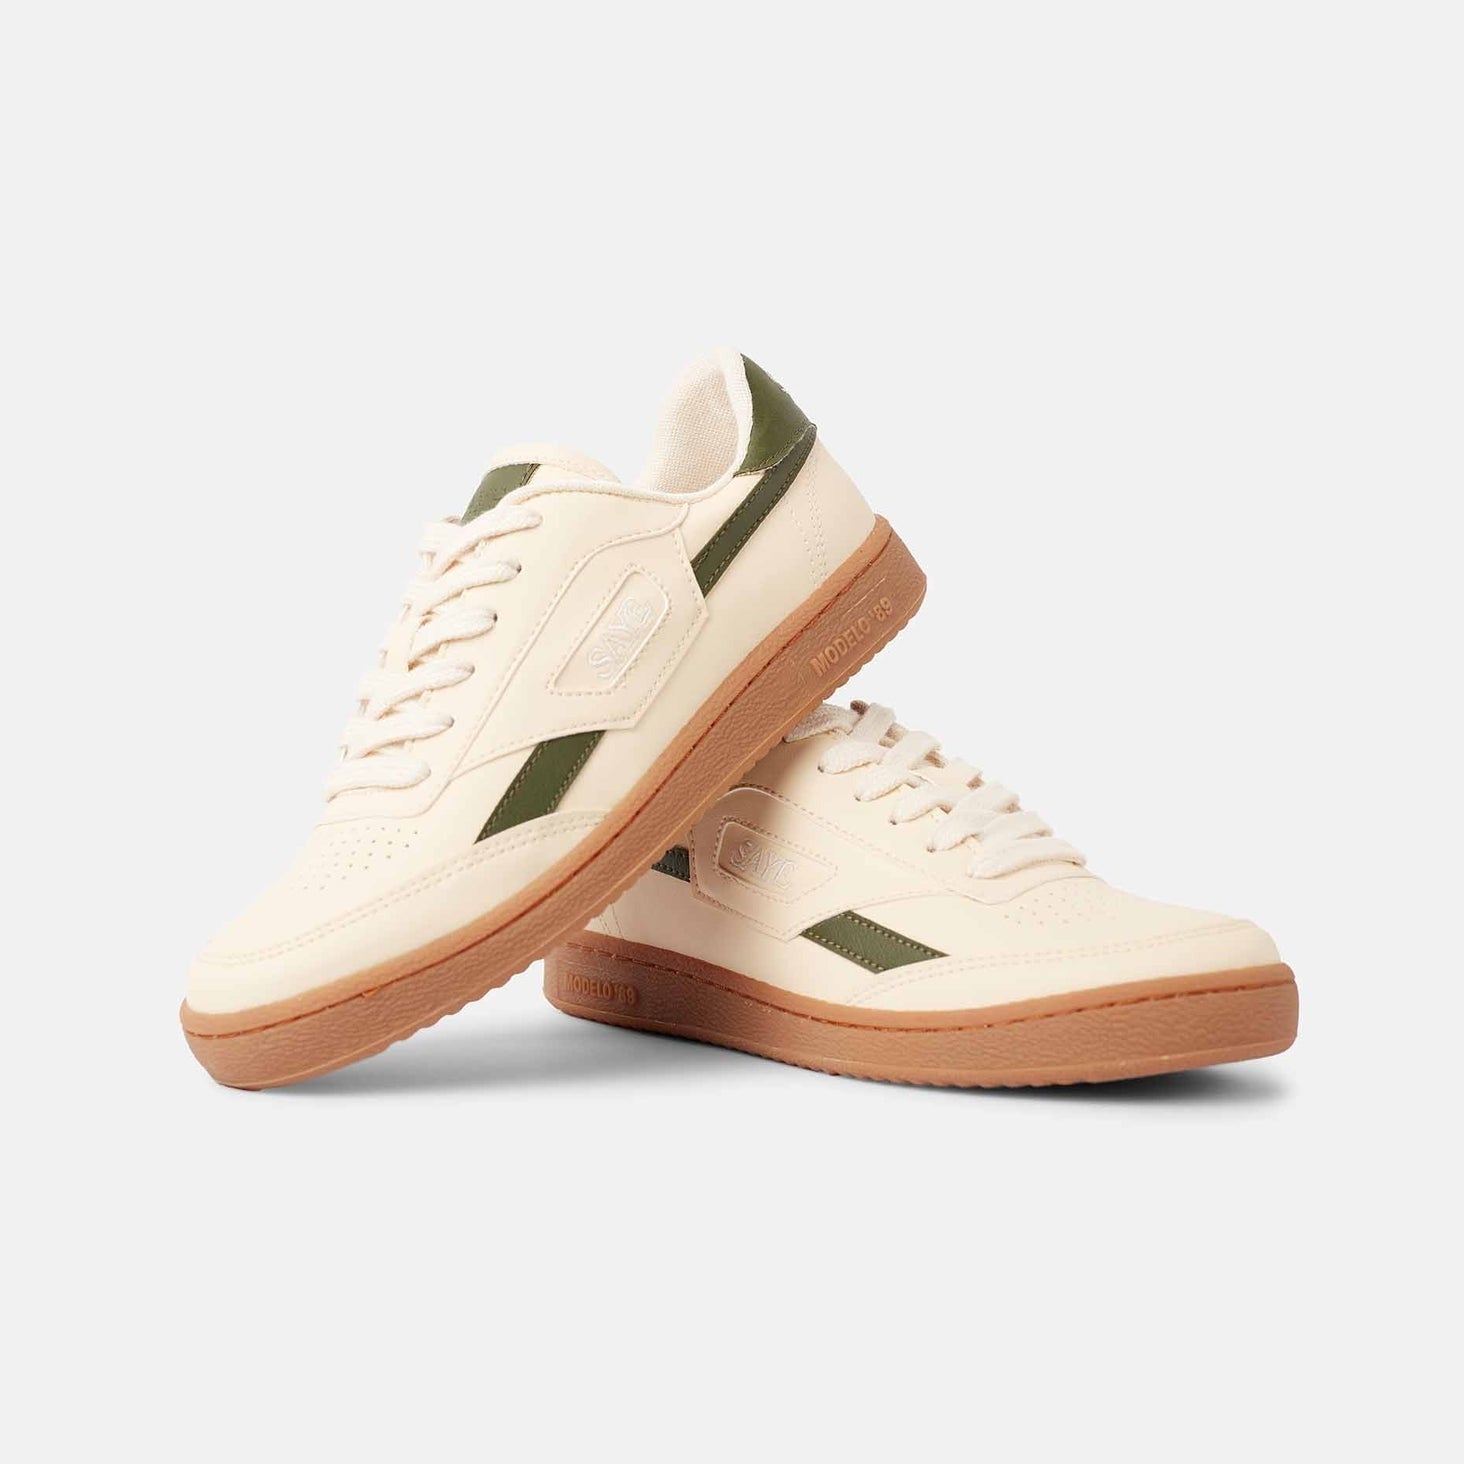 A pair of Modelo '89 Sneakers - Cactus from the SAYE Greens Capsule collection on a white background.